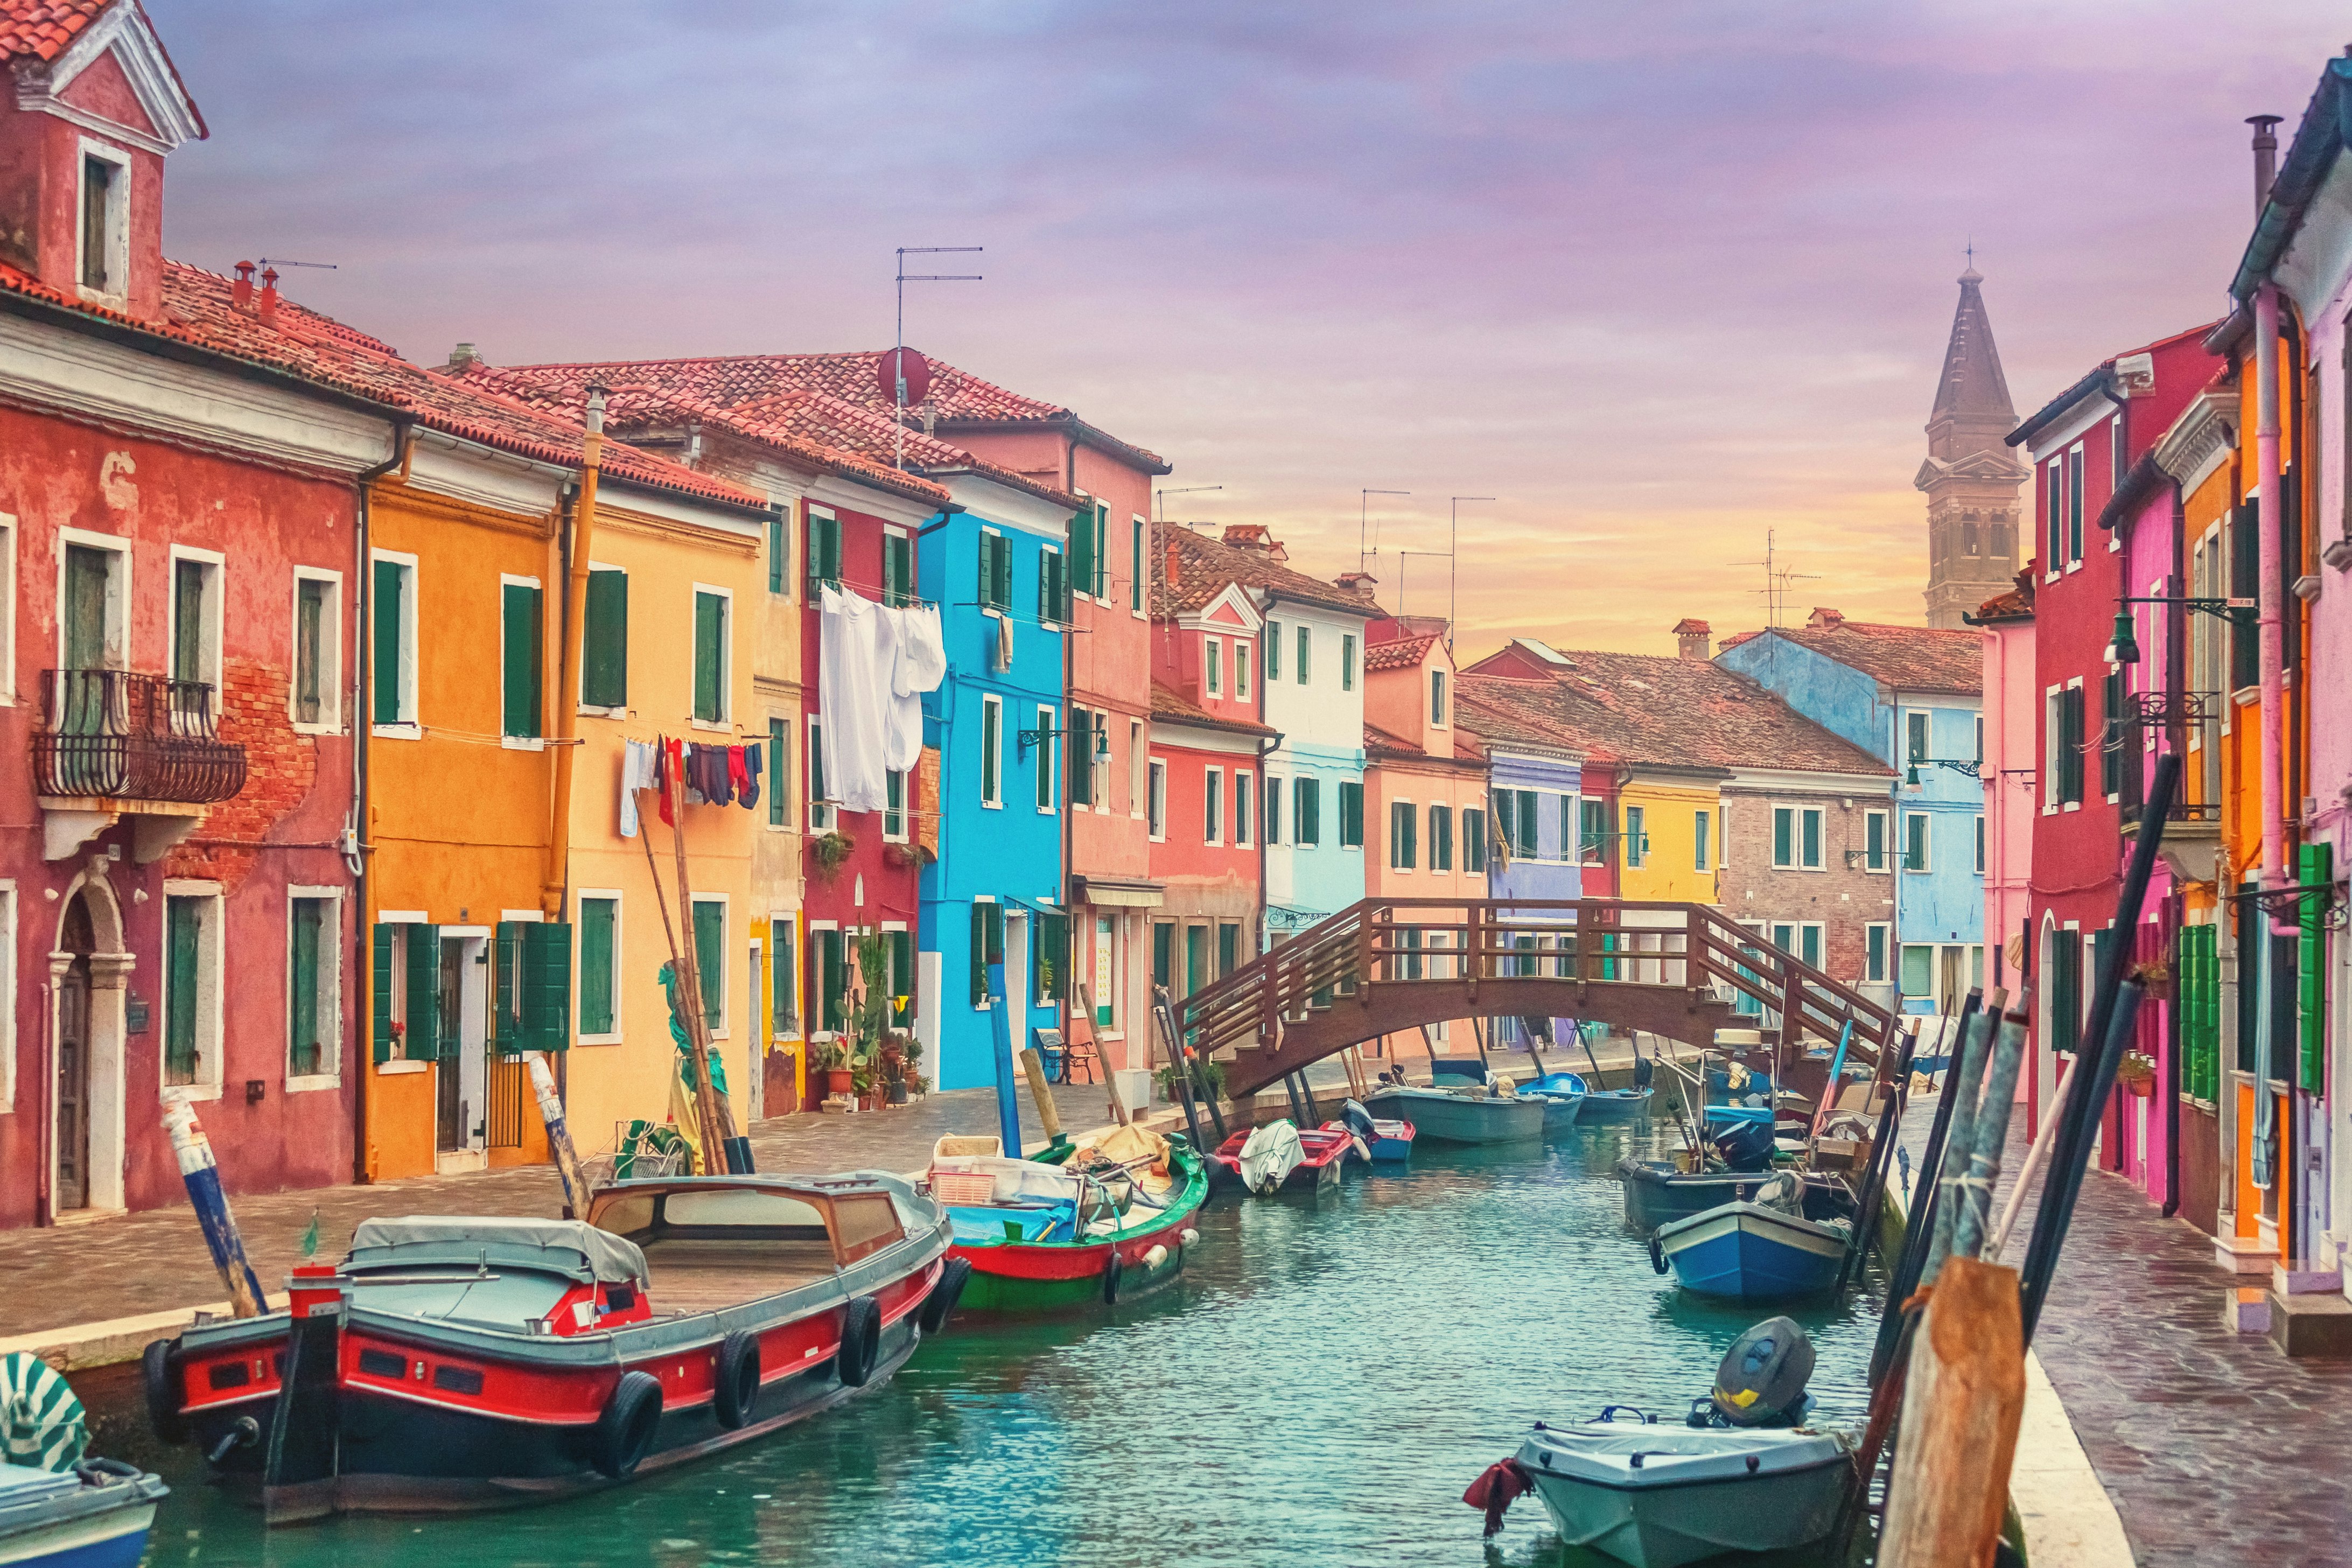 Houses painted striking primary colours along each side of a canal in Burano